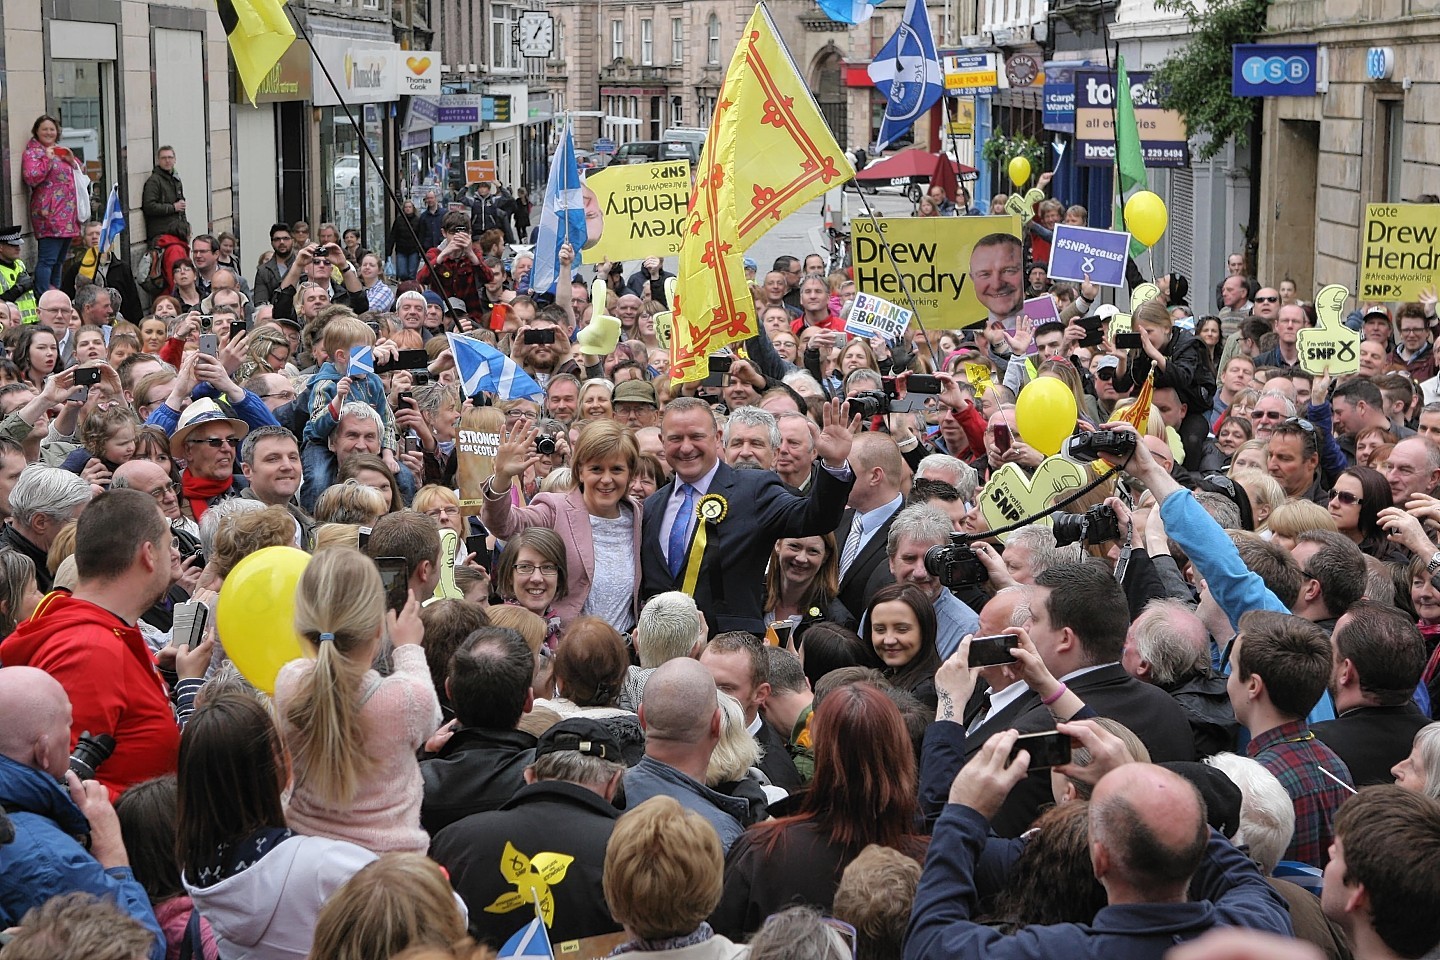 Large crowds gathered to meet Nicola Sturgeon on the streets of Inverness